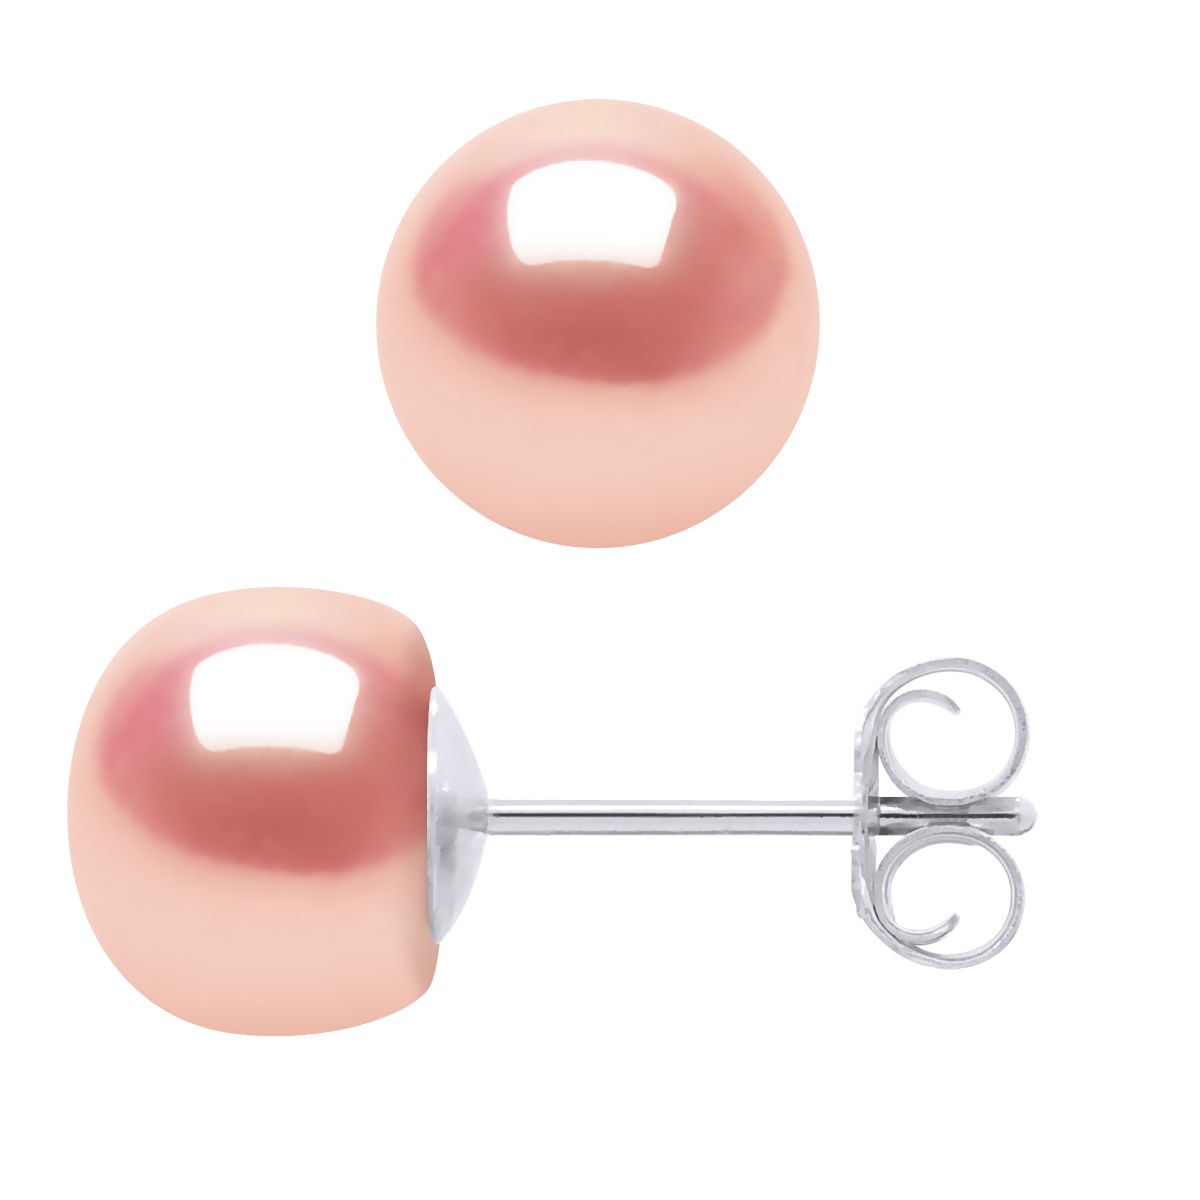 Earrings of 925 Sterling Silver and true Cultured Freshwater Pearls Button 7-8 mm - 0,31 in - Natural Pink Color and Push system - Our jewellery is made in France and will be delivered in a gift box accompanied by a Certificate of Authenticity and International Warranty